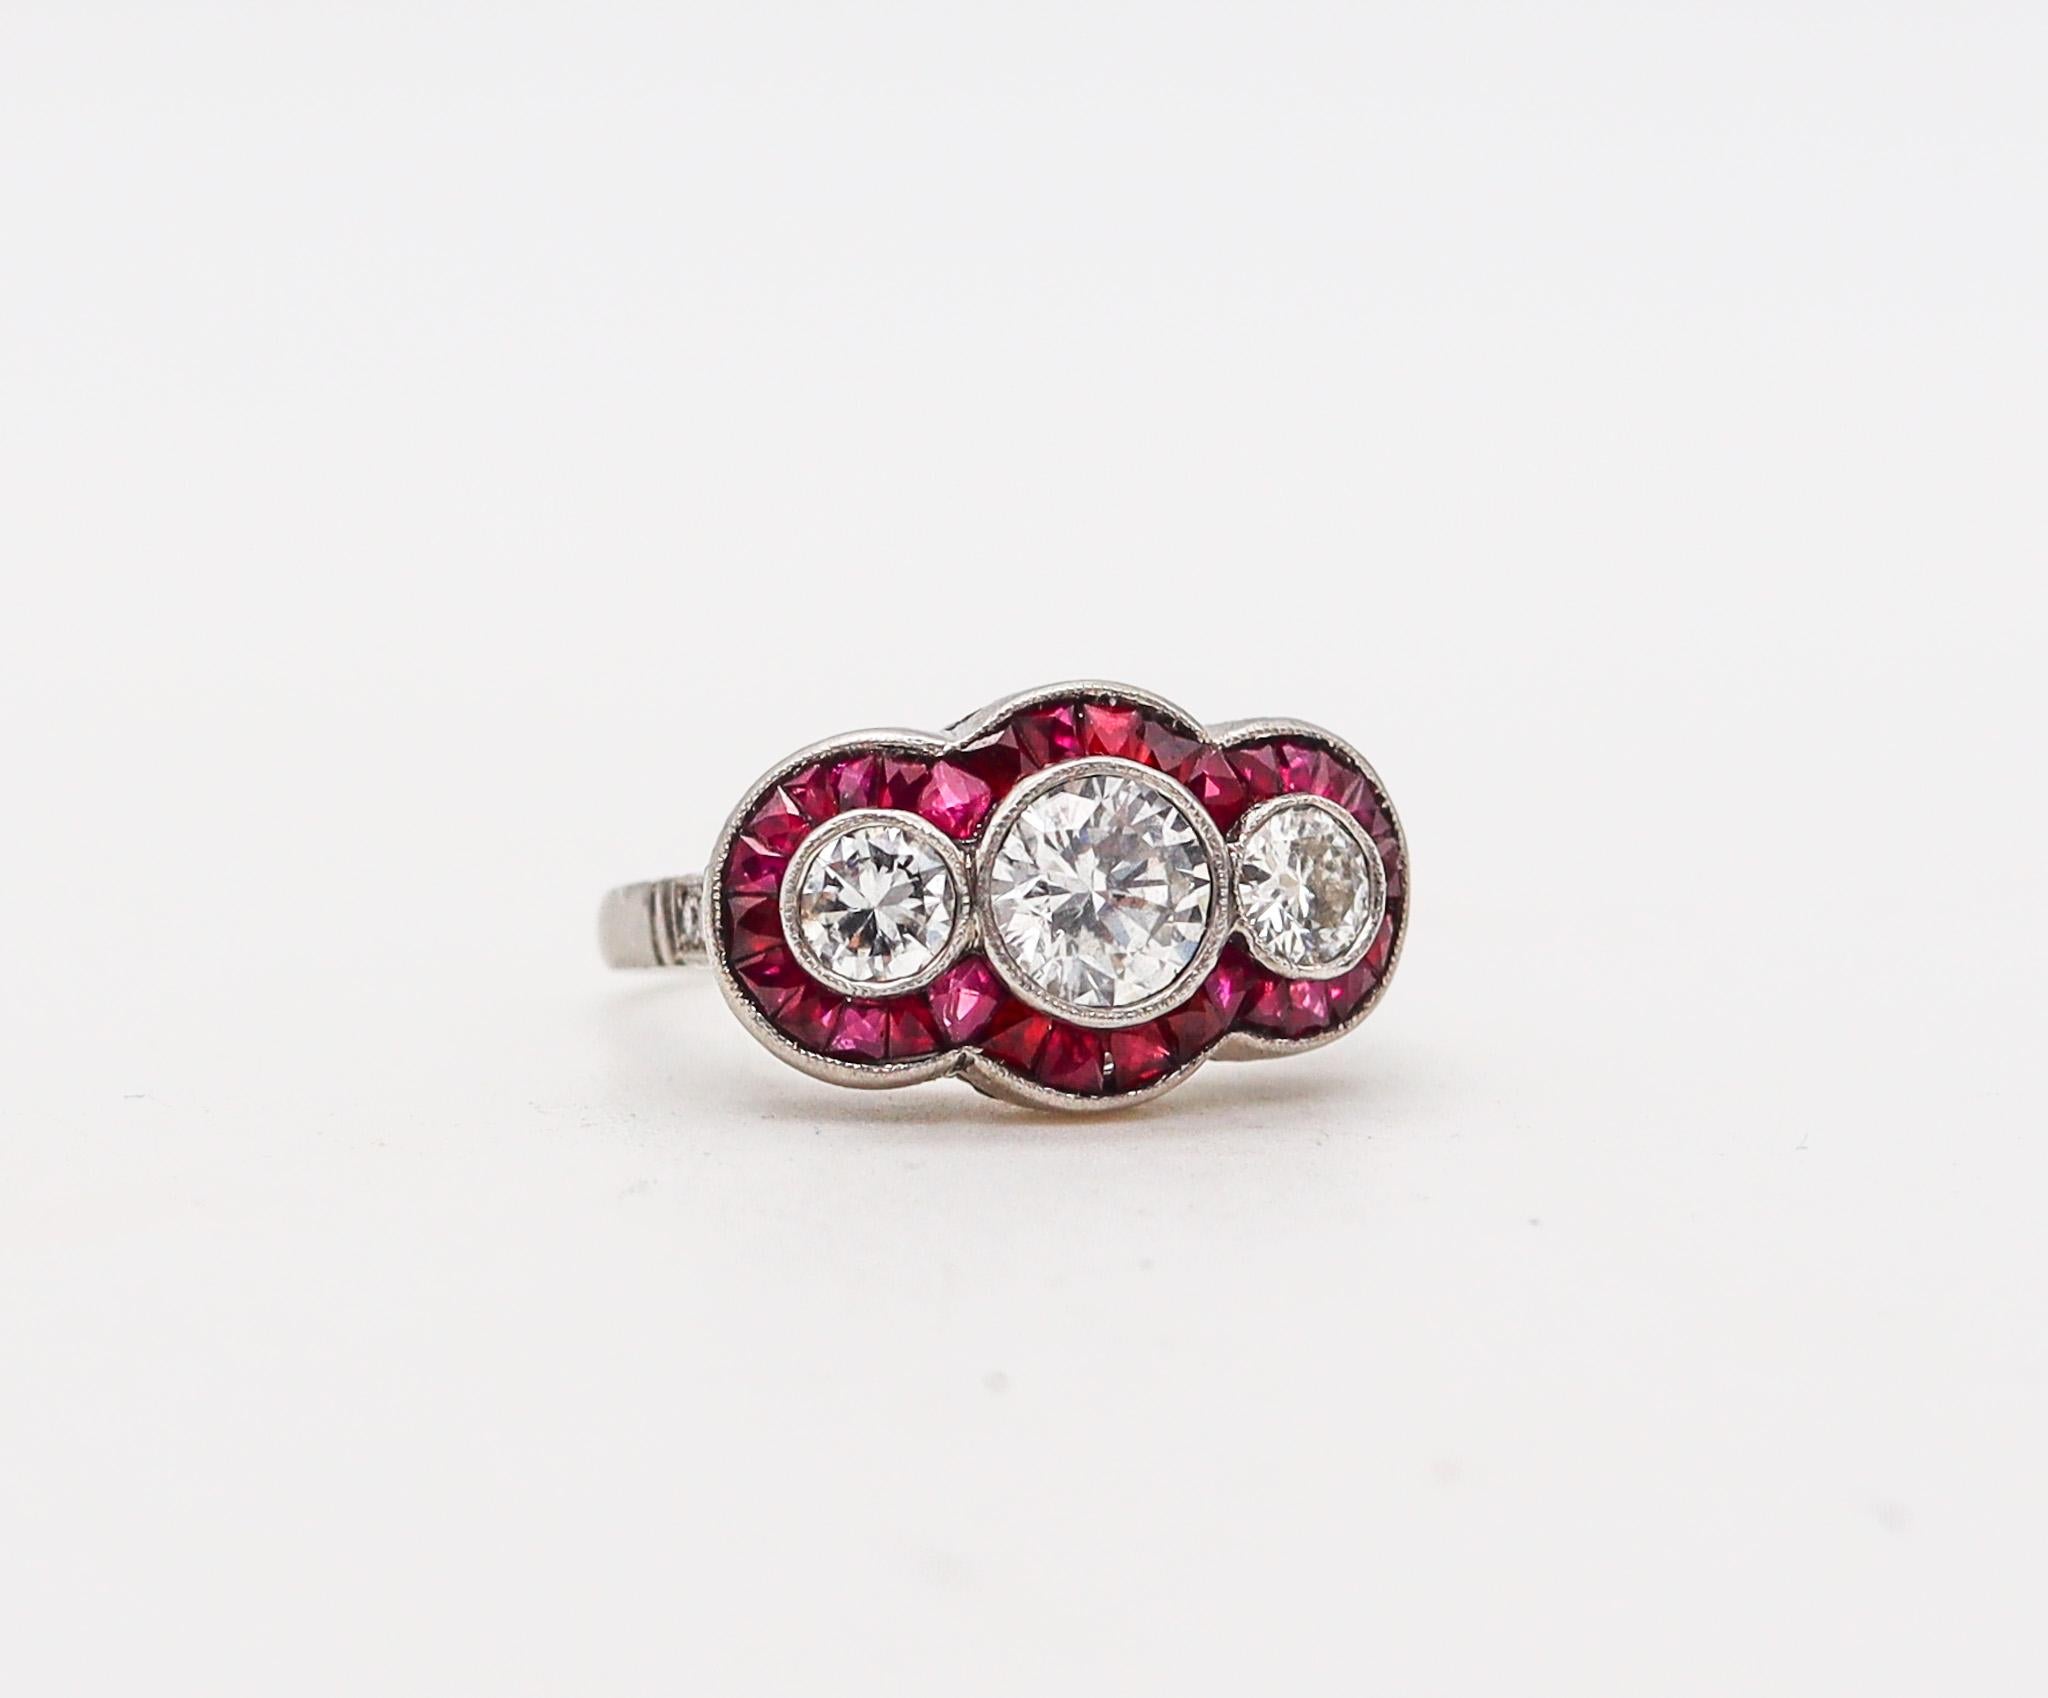 An art deco three stones ring with rubies.

Beautiful three diamonds ring, created in America during the art deco period, back in the 1925. This beautiful ring clearly scream art deco and was crafted in solid platinum with high polished finish. It